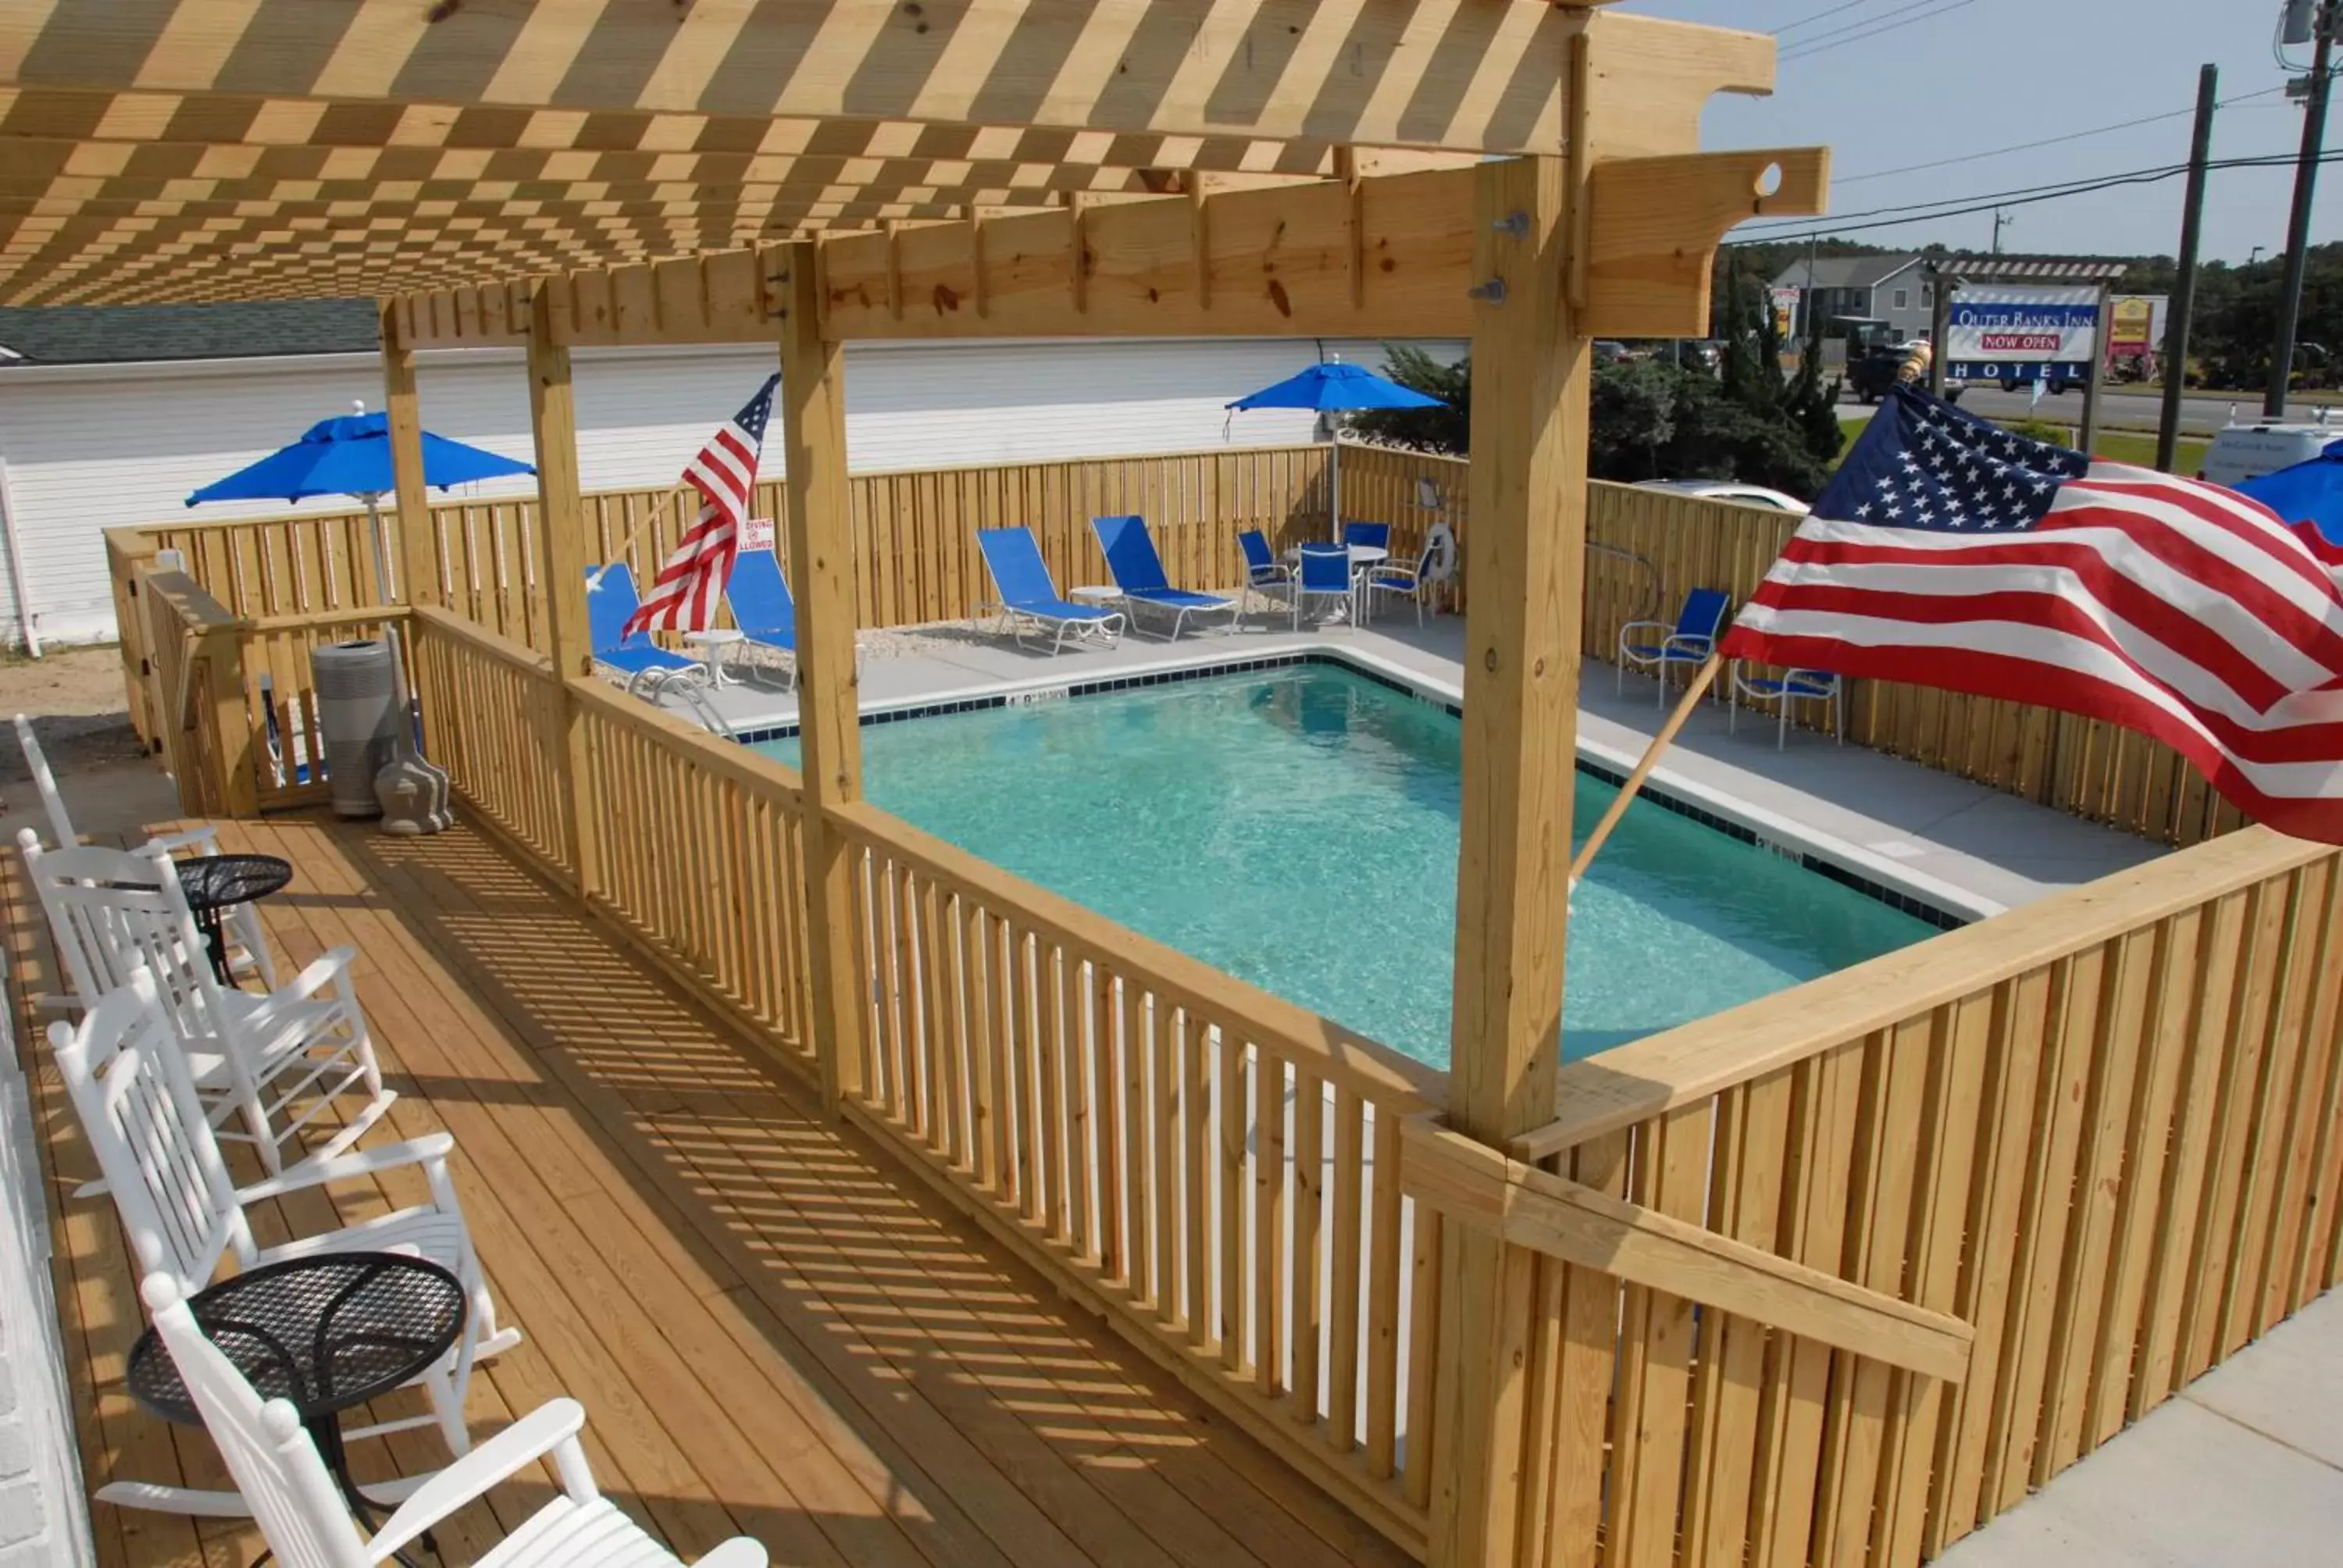 Swimming Pool in Outer Banks Inn